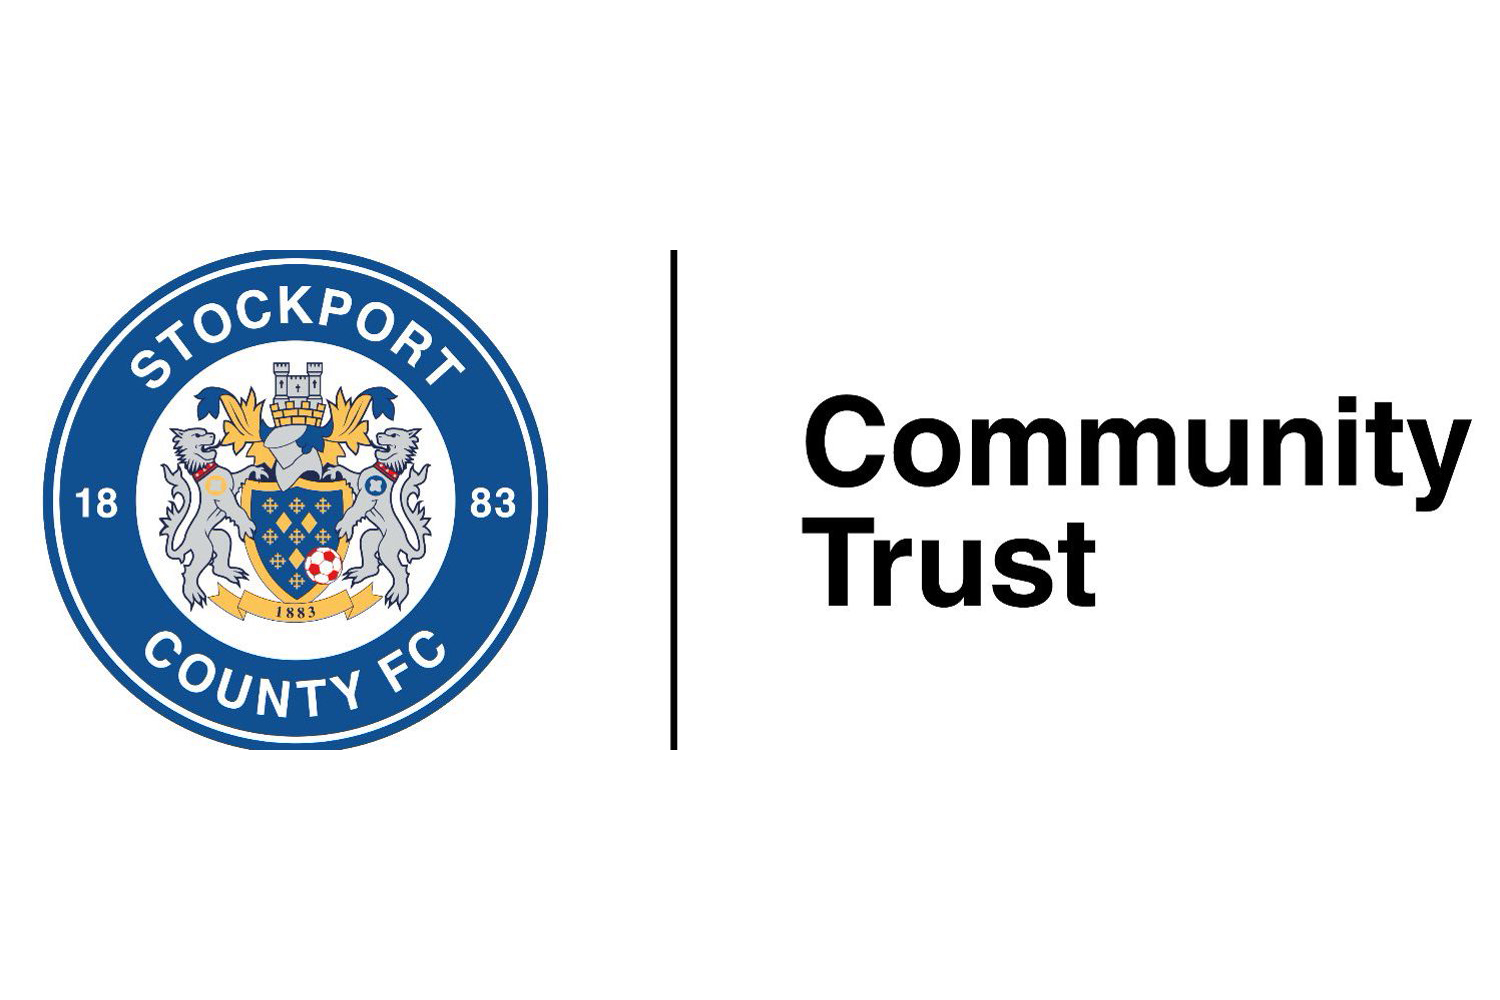 Stockport County logo and the words [Community Trust]